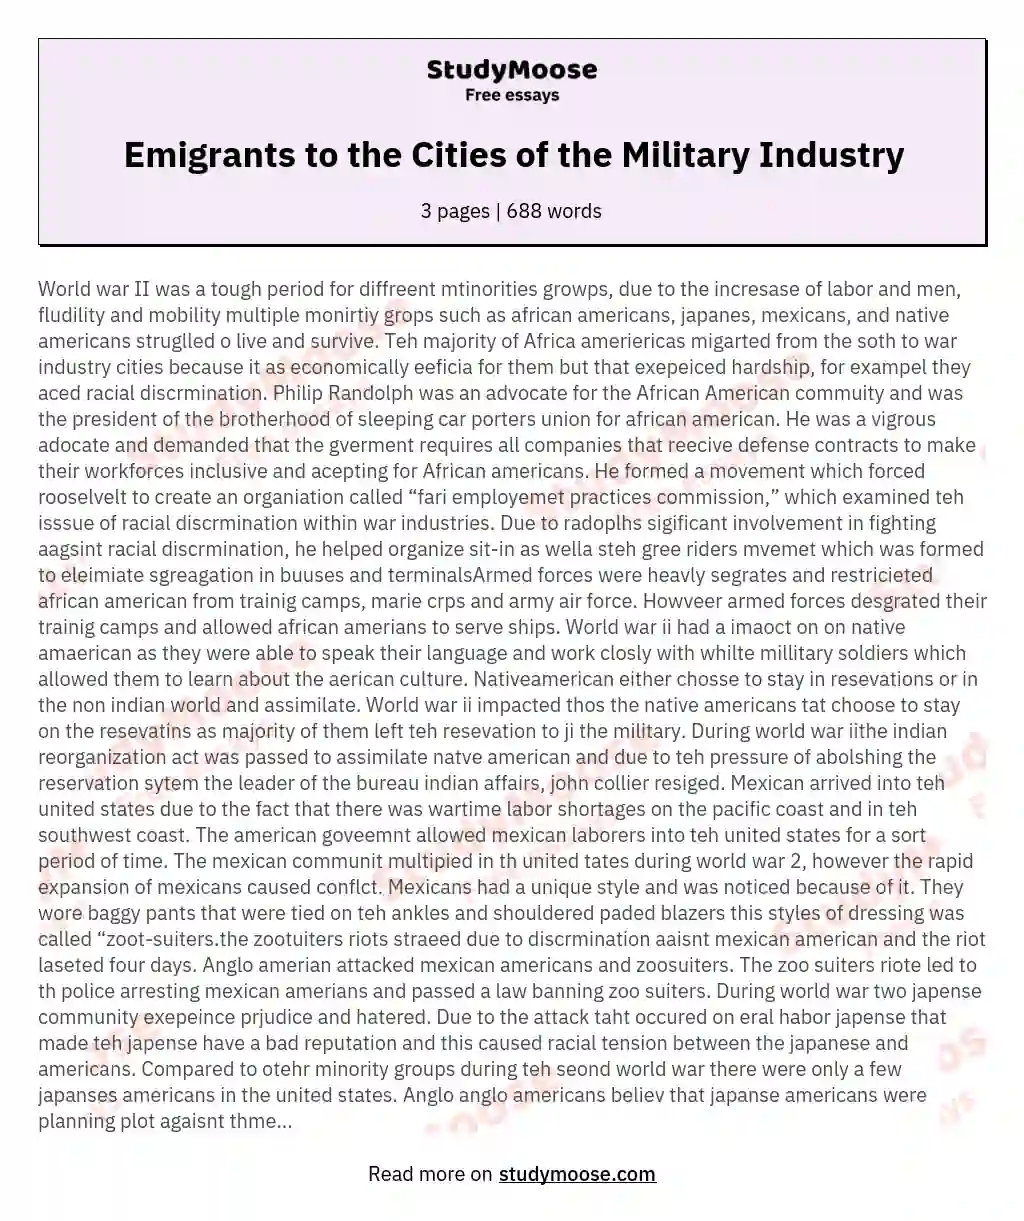 Emigrants to the Cities of the Military Industry essay